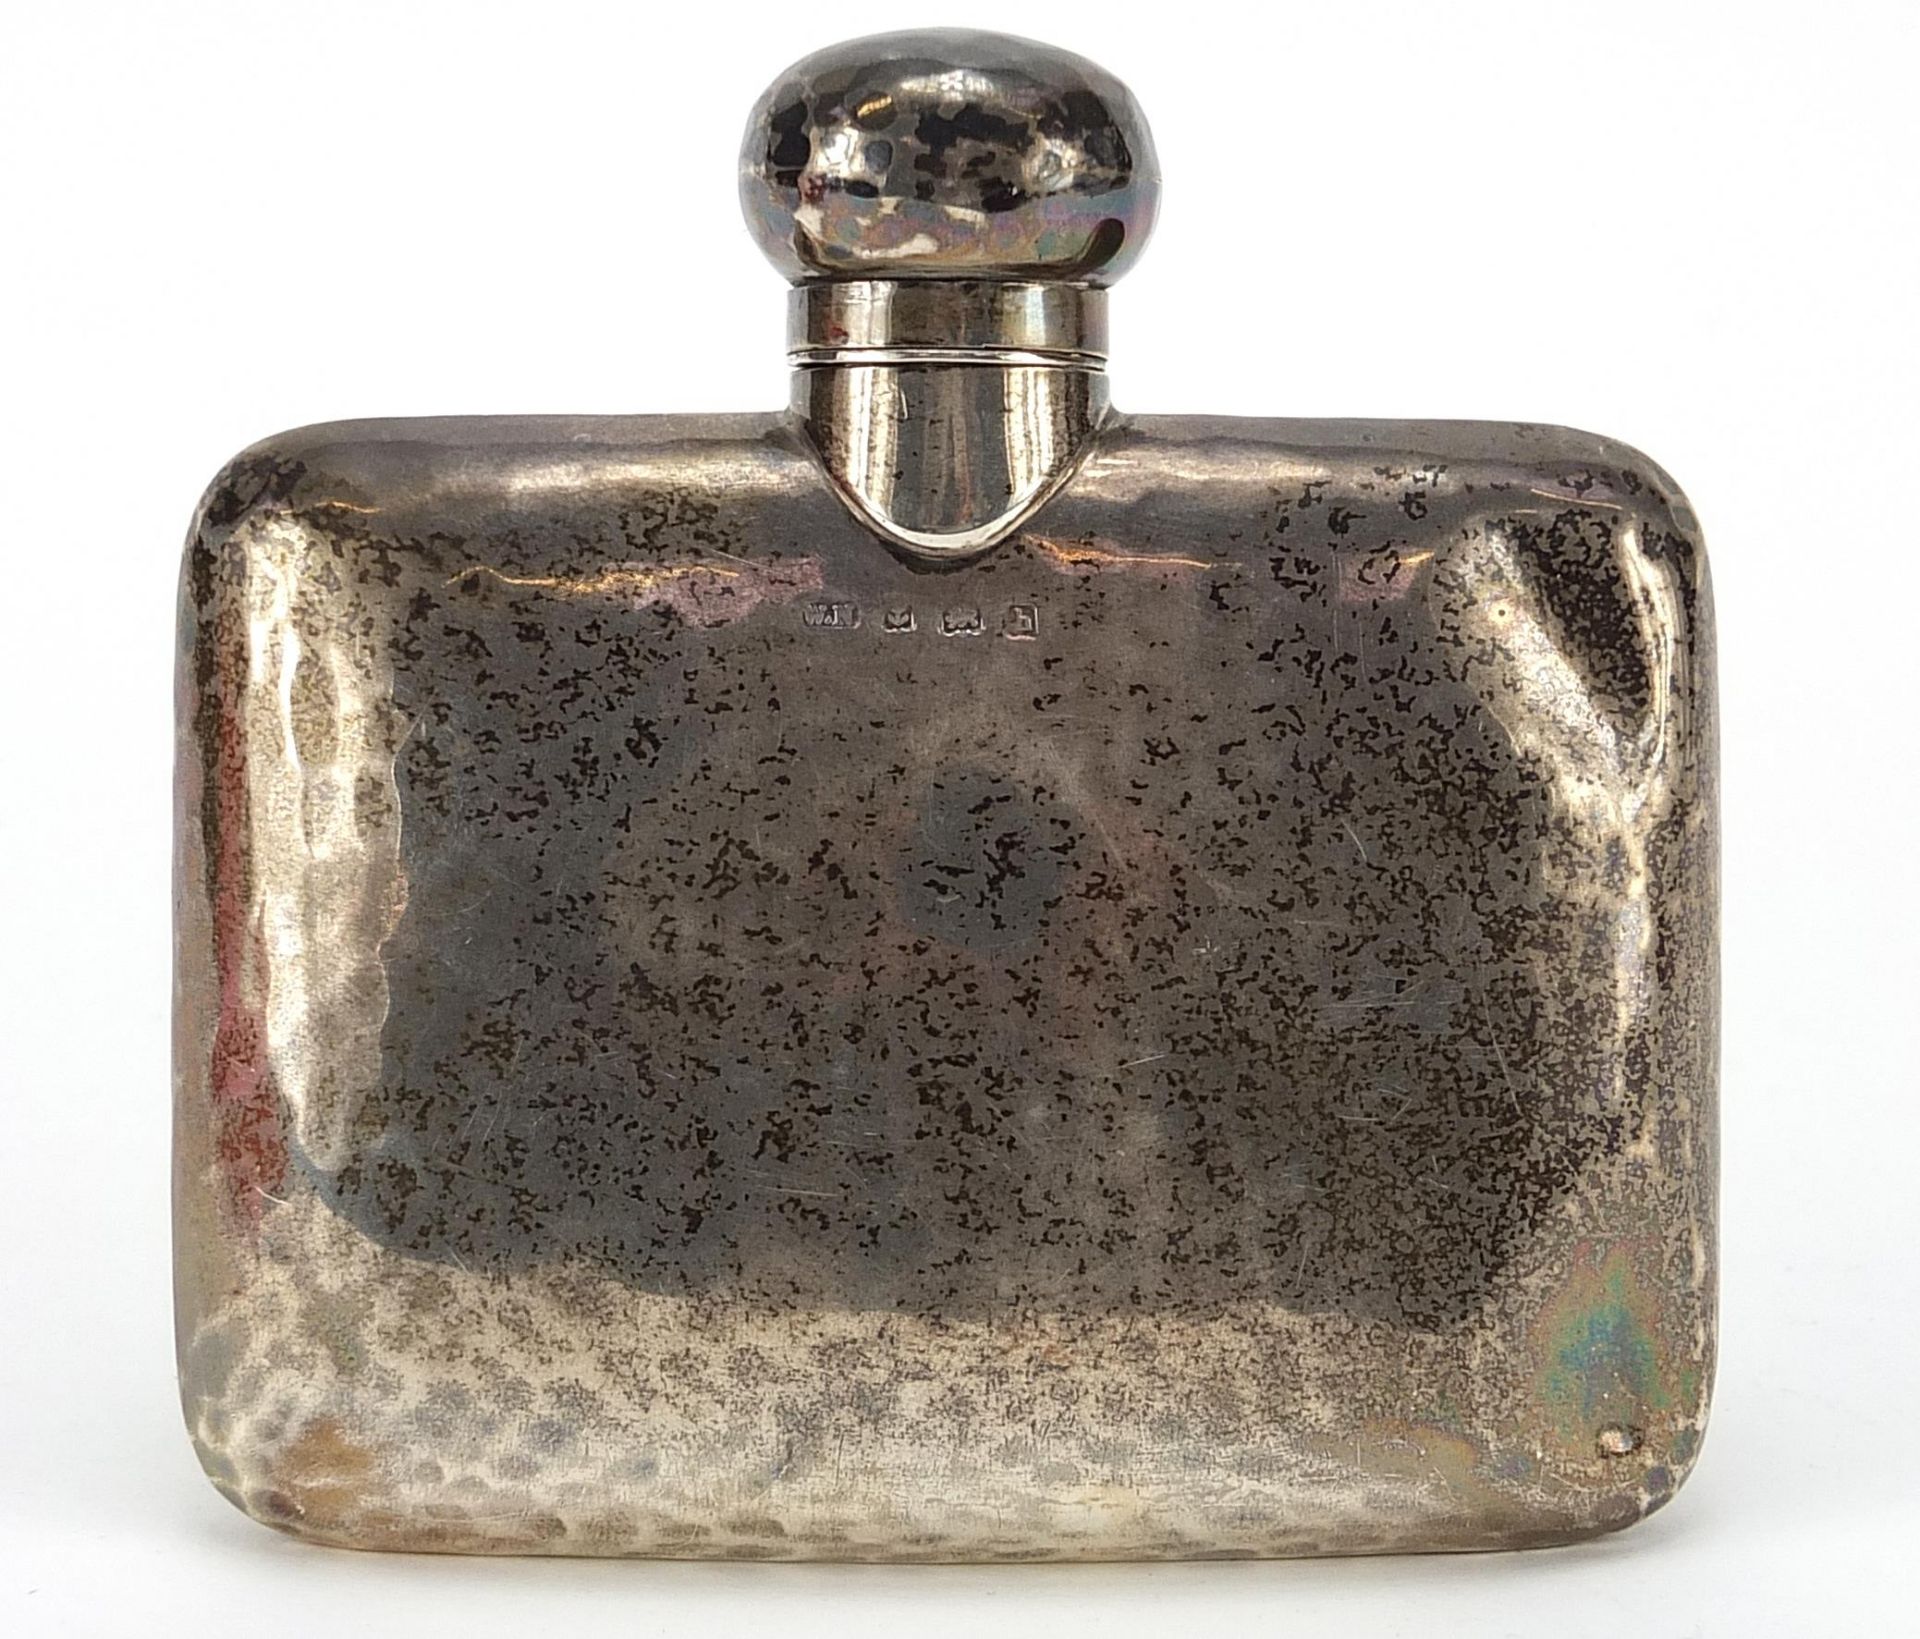 William Neal & Son, Edwardian silver hip flask with planished decoration, Birmingham 1907, 9.5cm